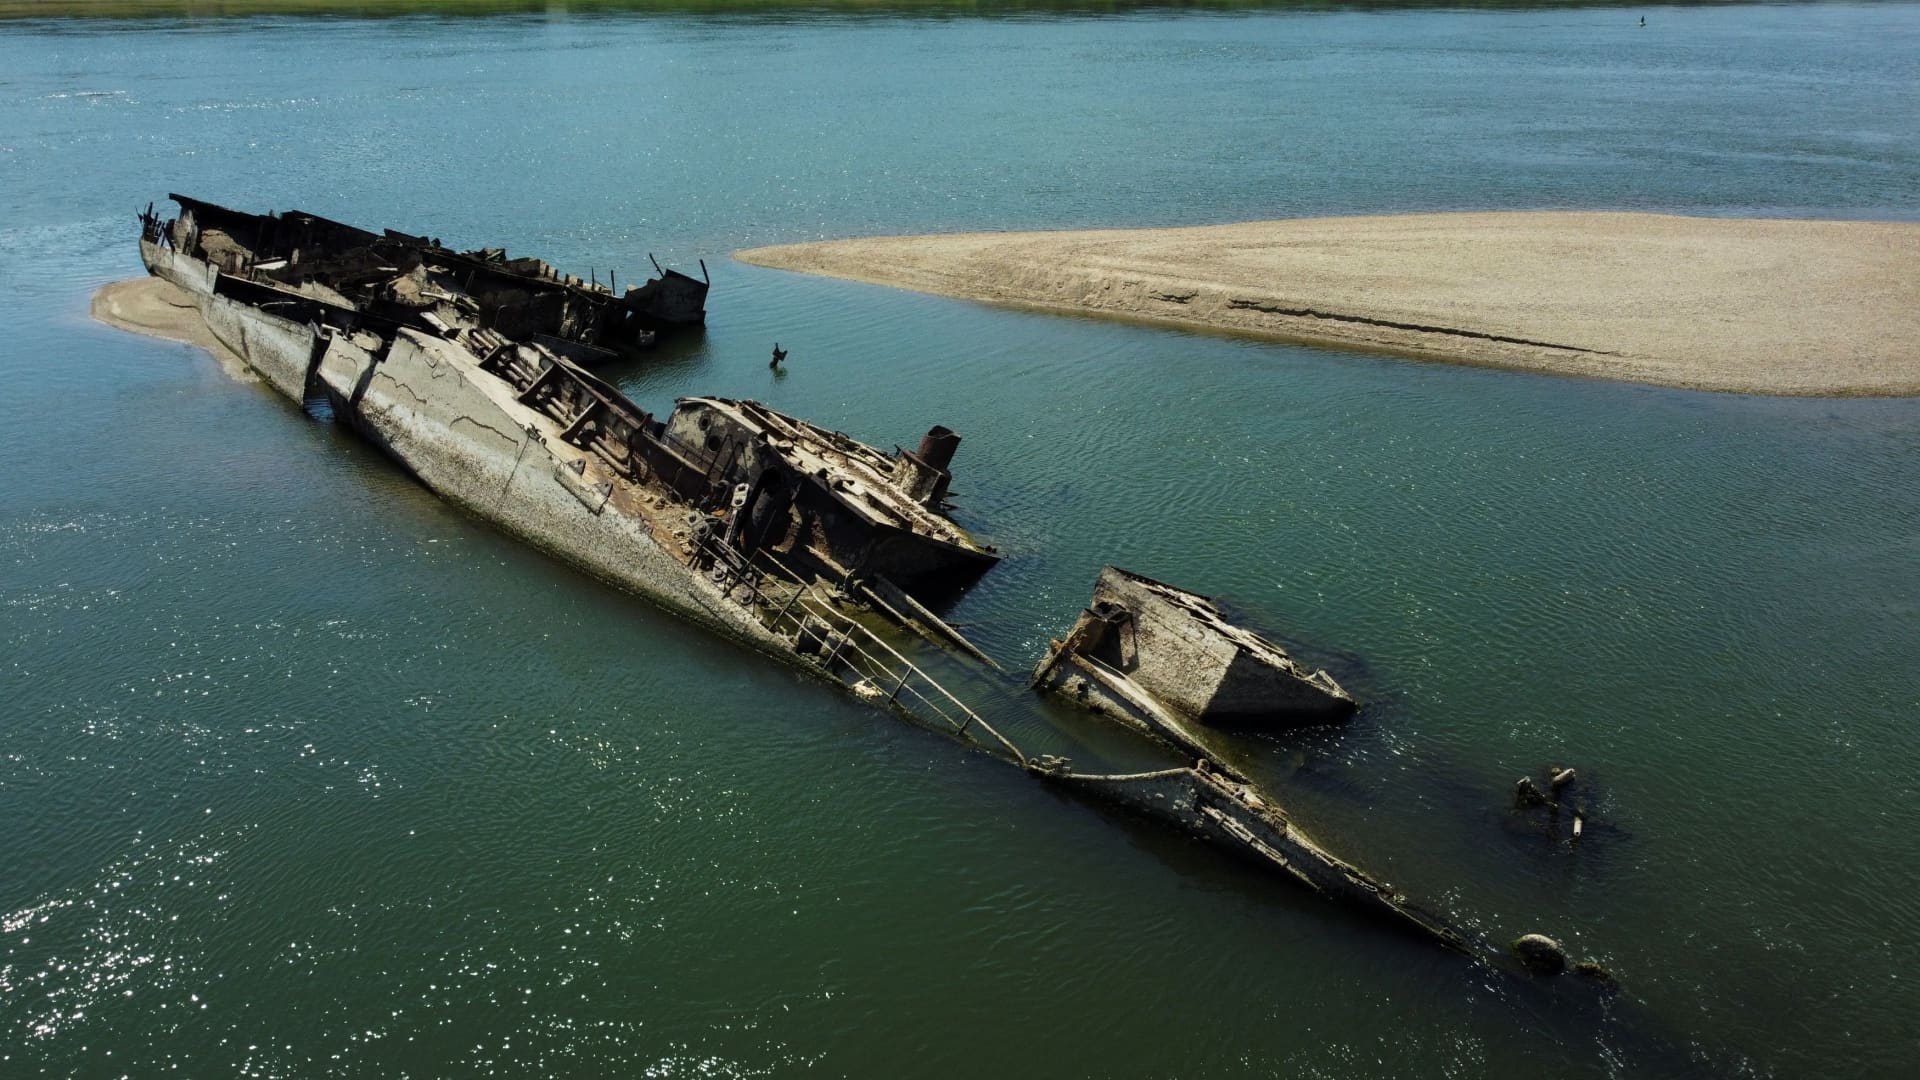 Wreckage of a World War Two German warship is seen in the Danube in Prahovo, Serbia August 18, 2022. 